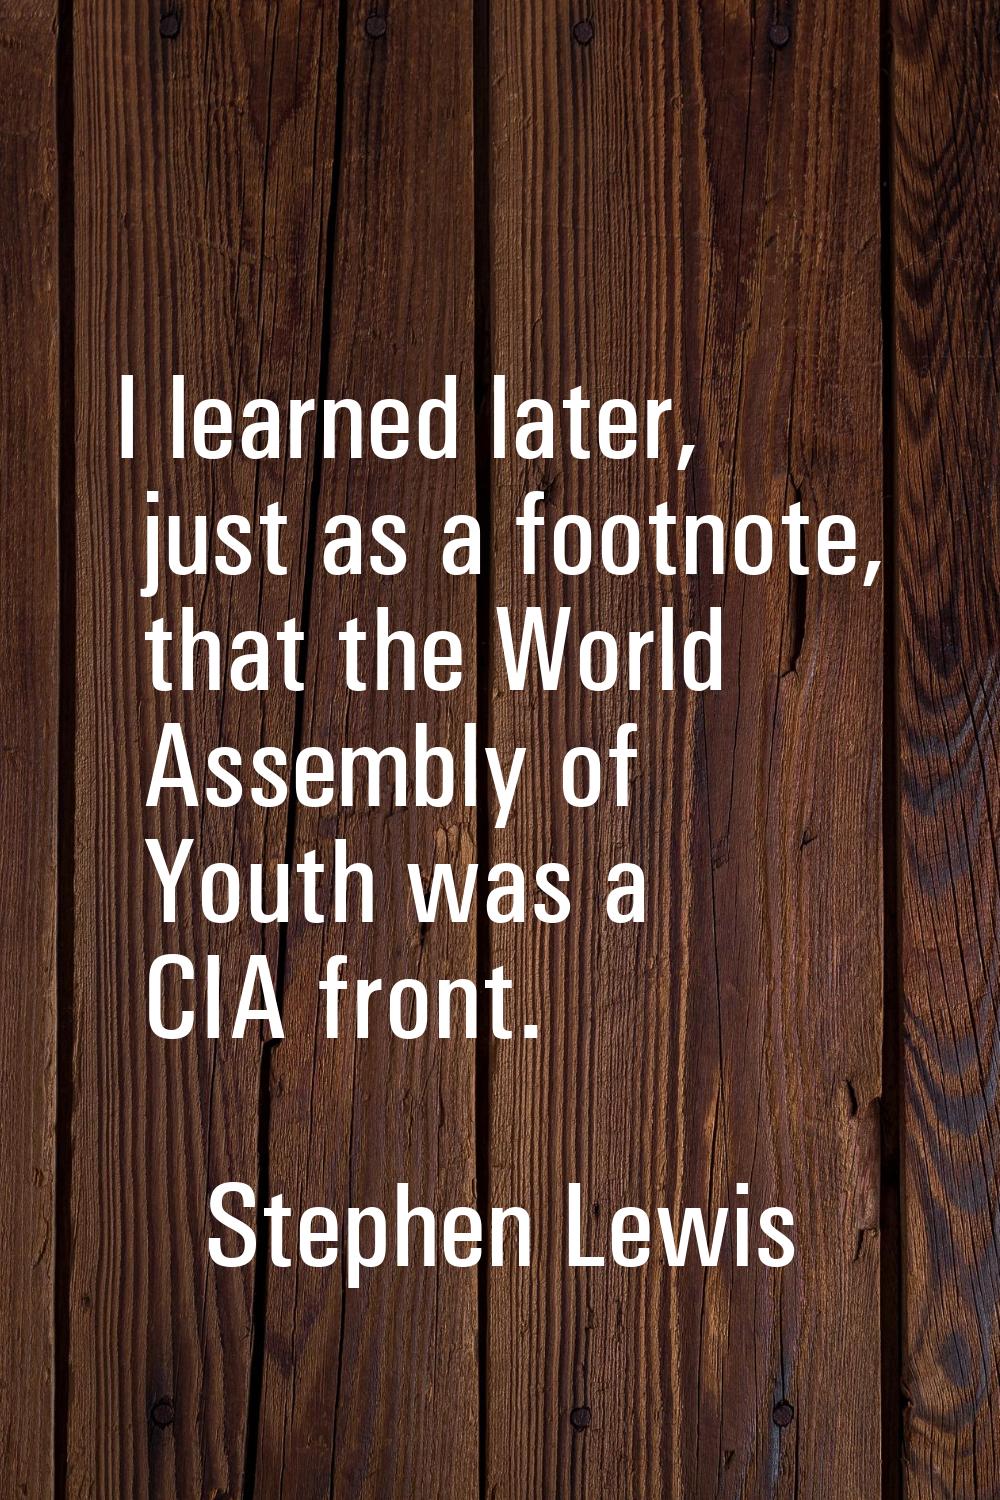 I learned later, just as a footnote, that the World Assembly of Youth was a CIA front.